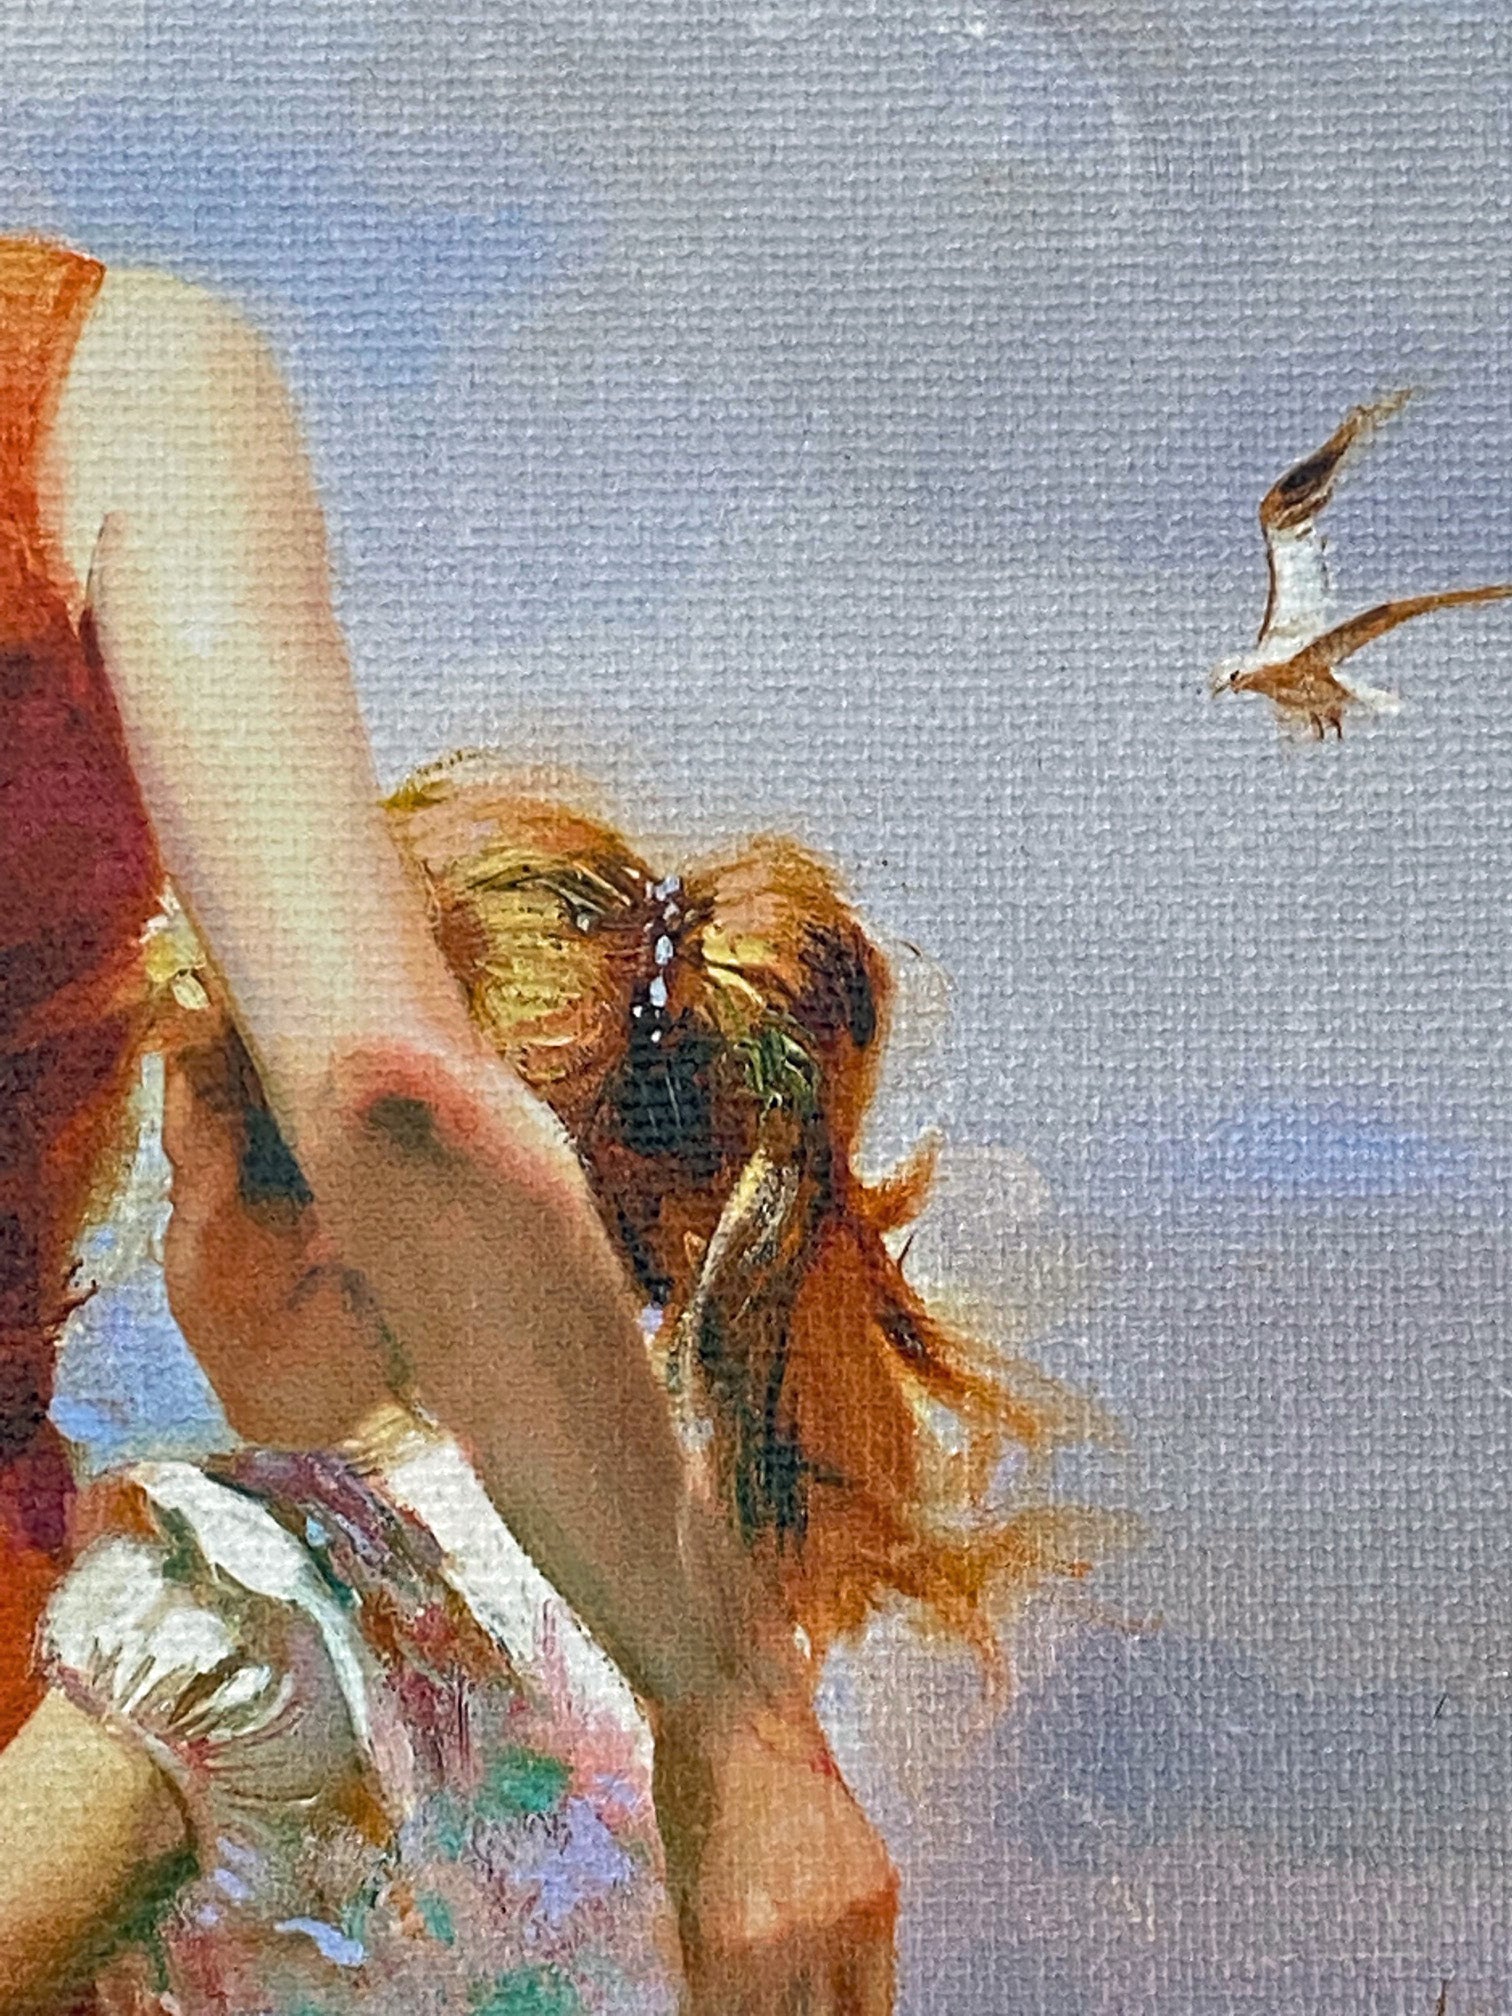 Breezy Days Pino Daeni Canvas Giclée Print Artist Hand Signed and Numbered